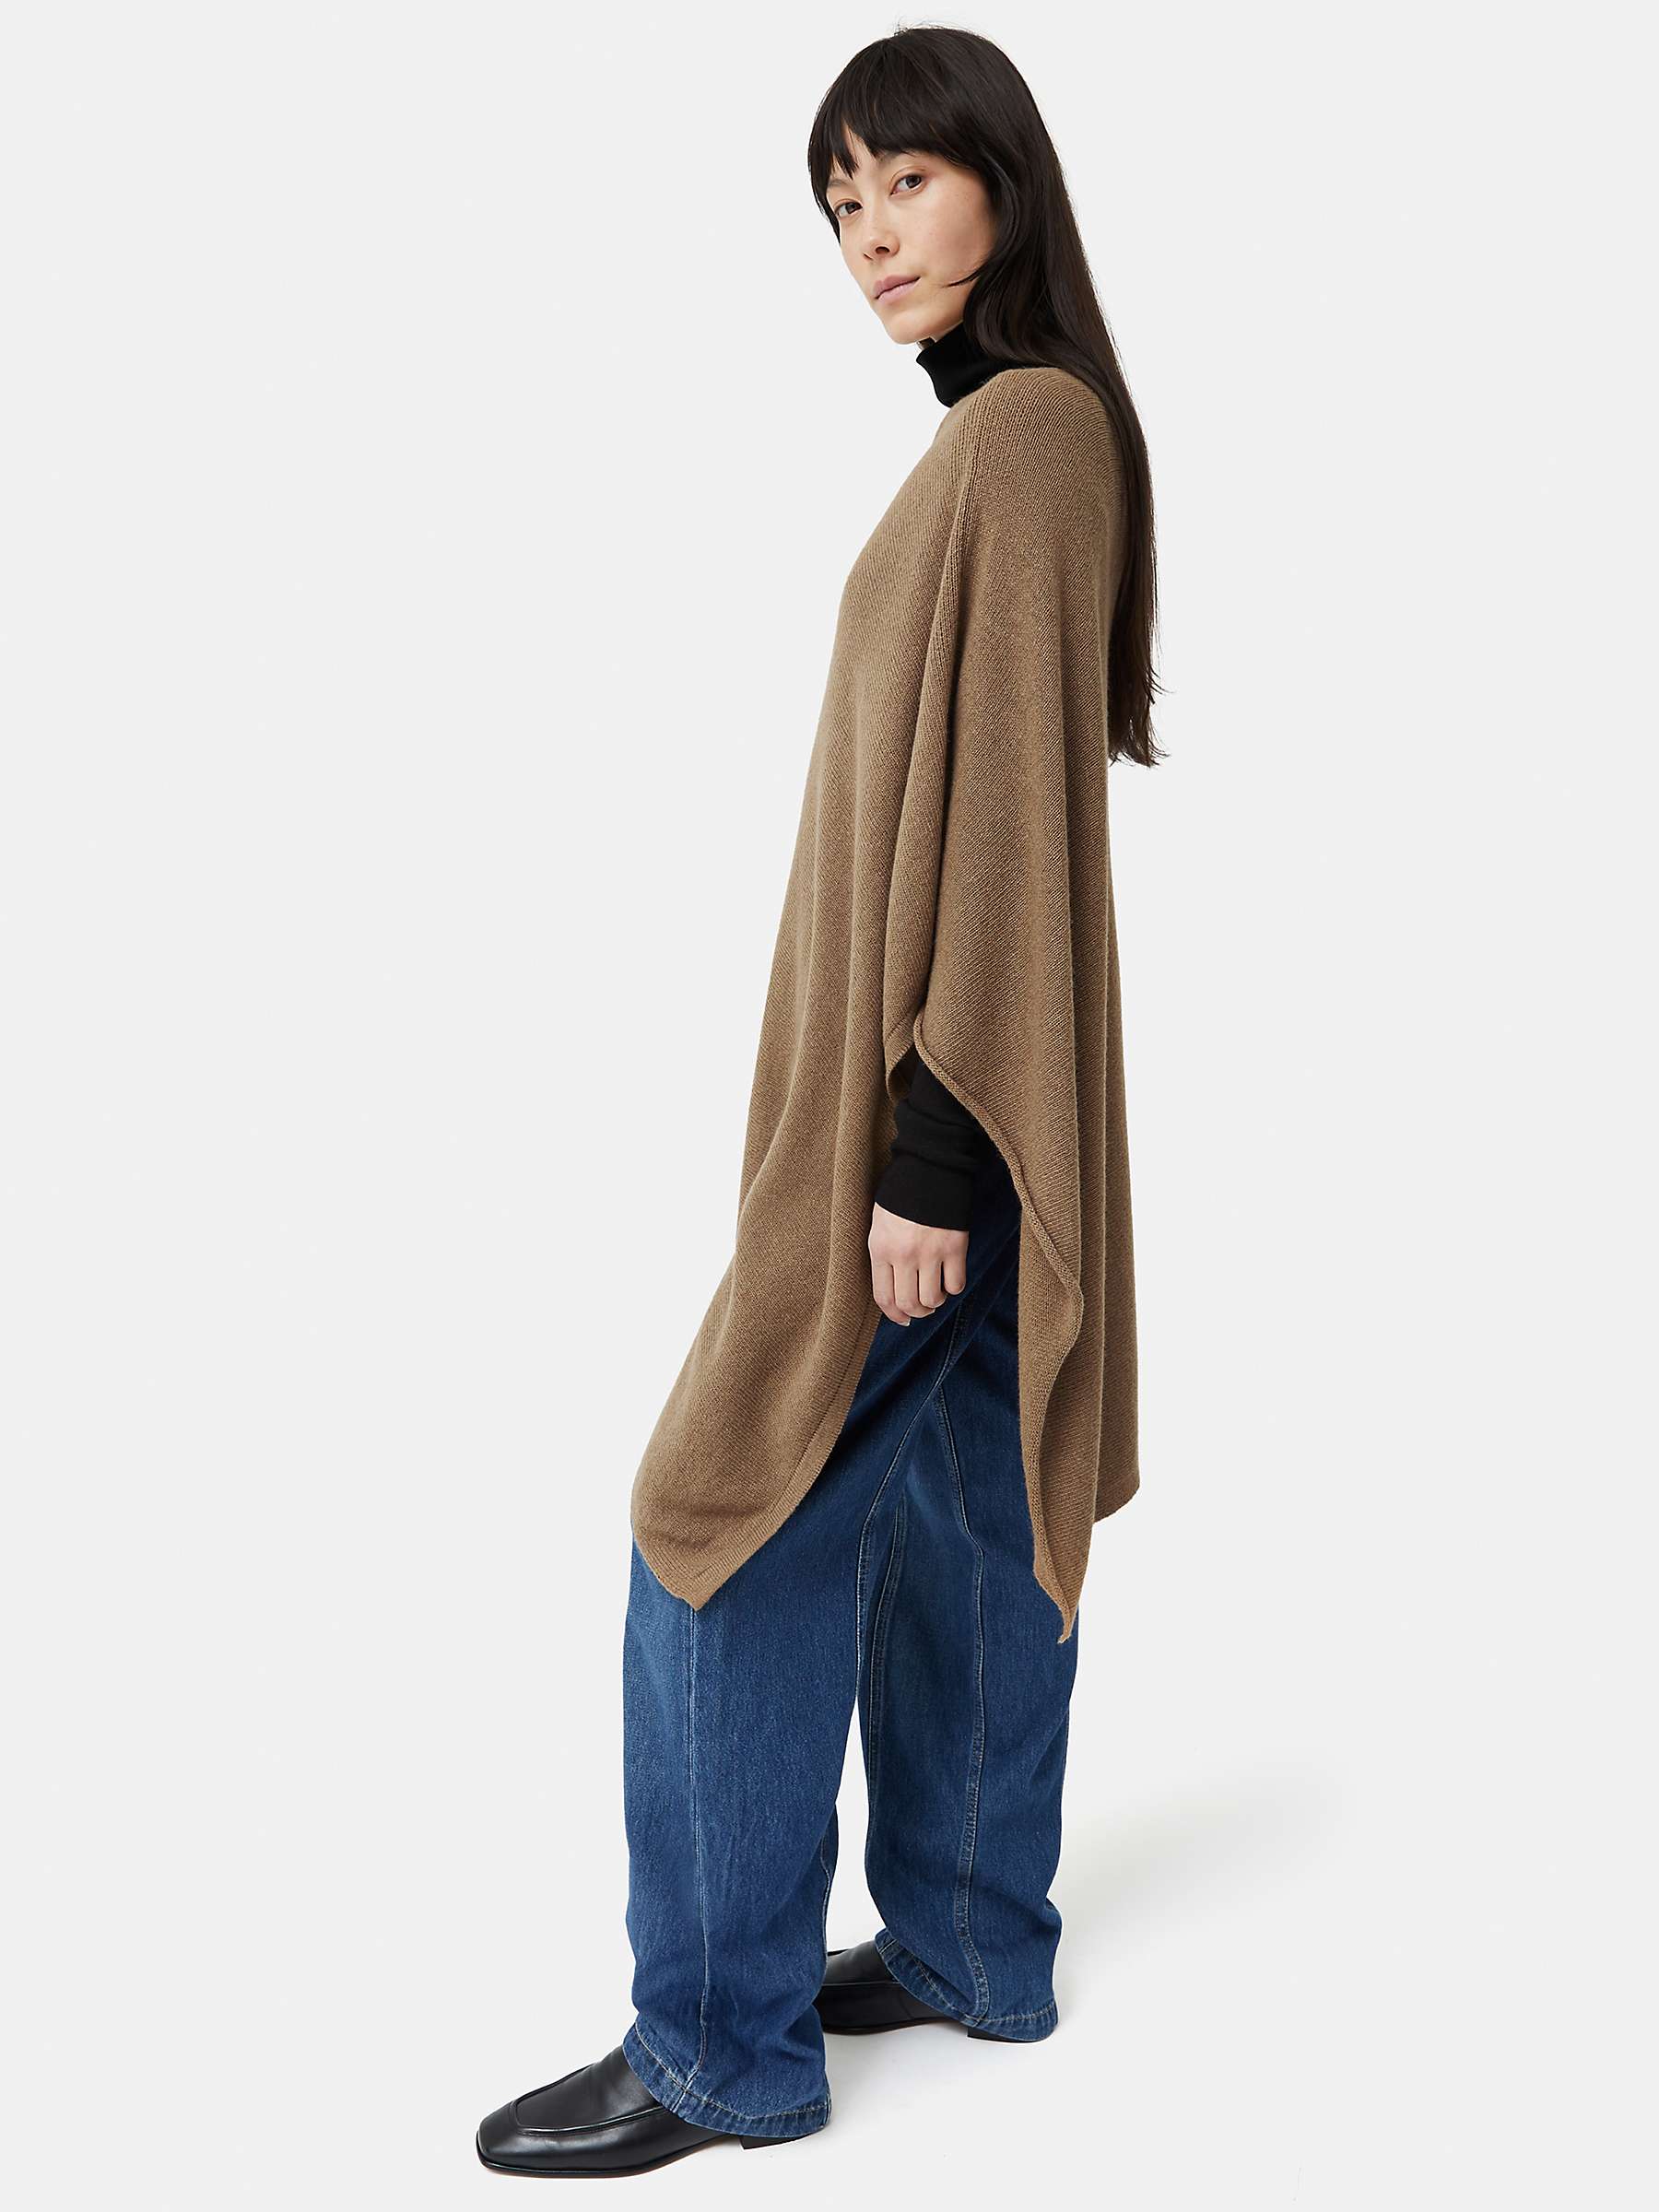 Buy Jigsaw Wool Cashmere Blend Poncho Online at johnlewis.com